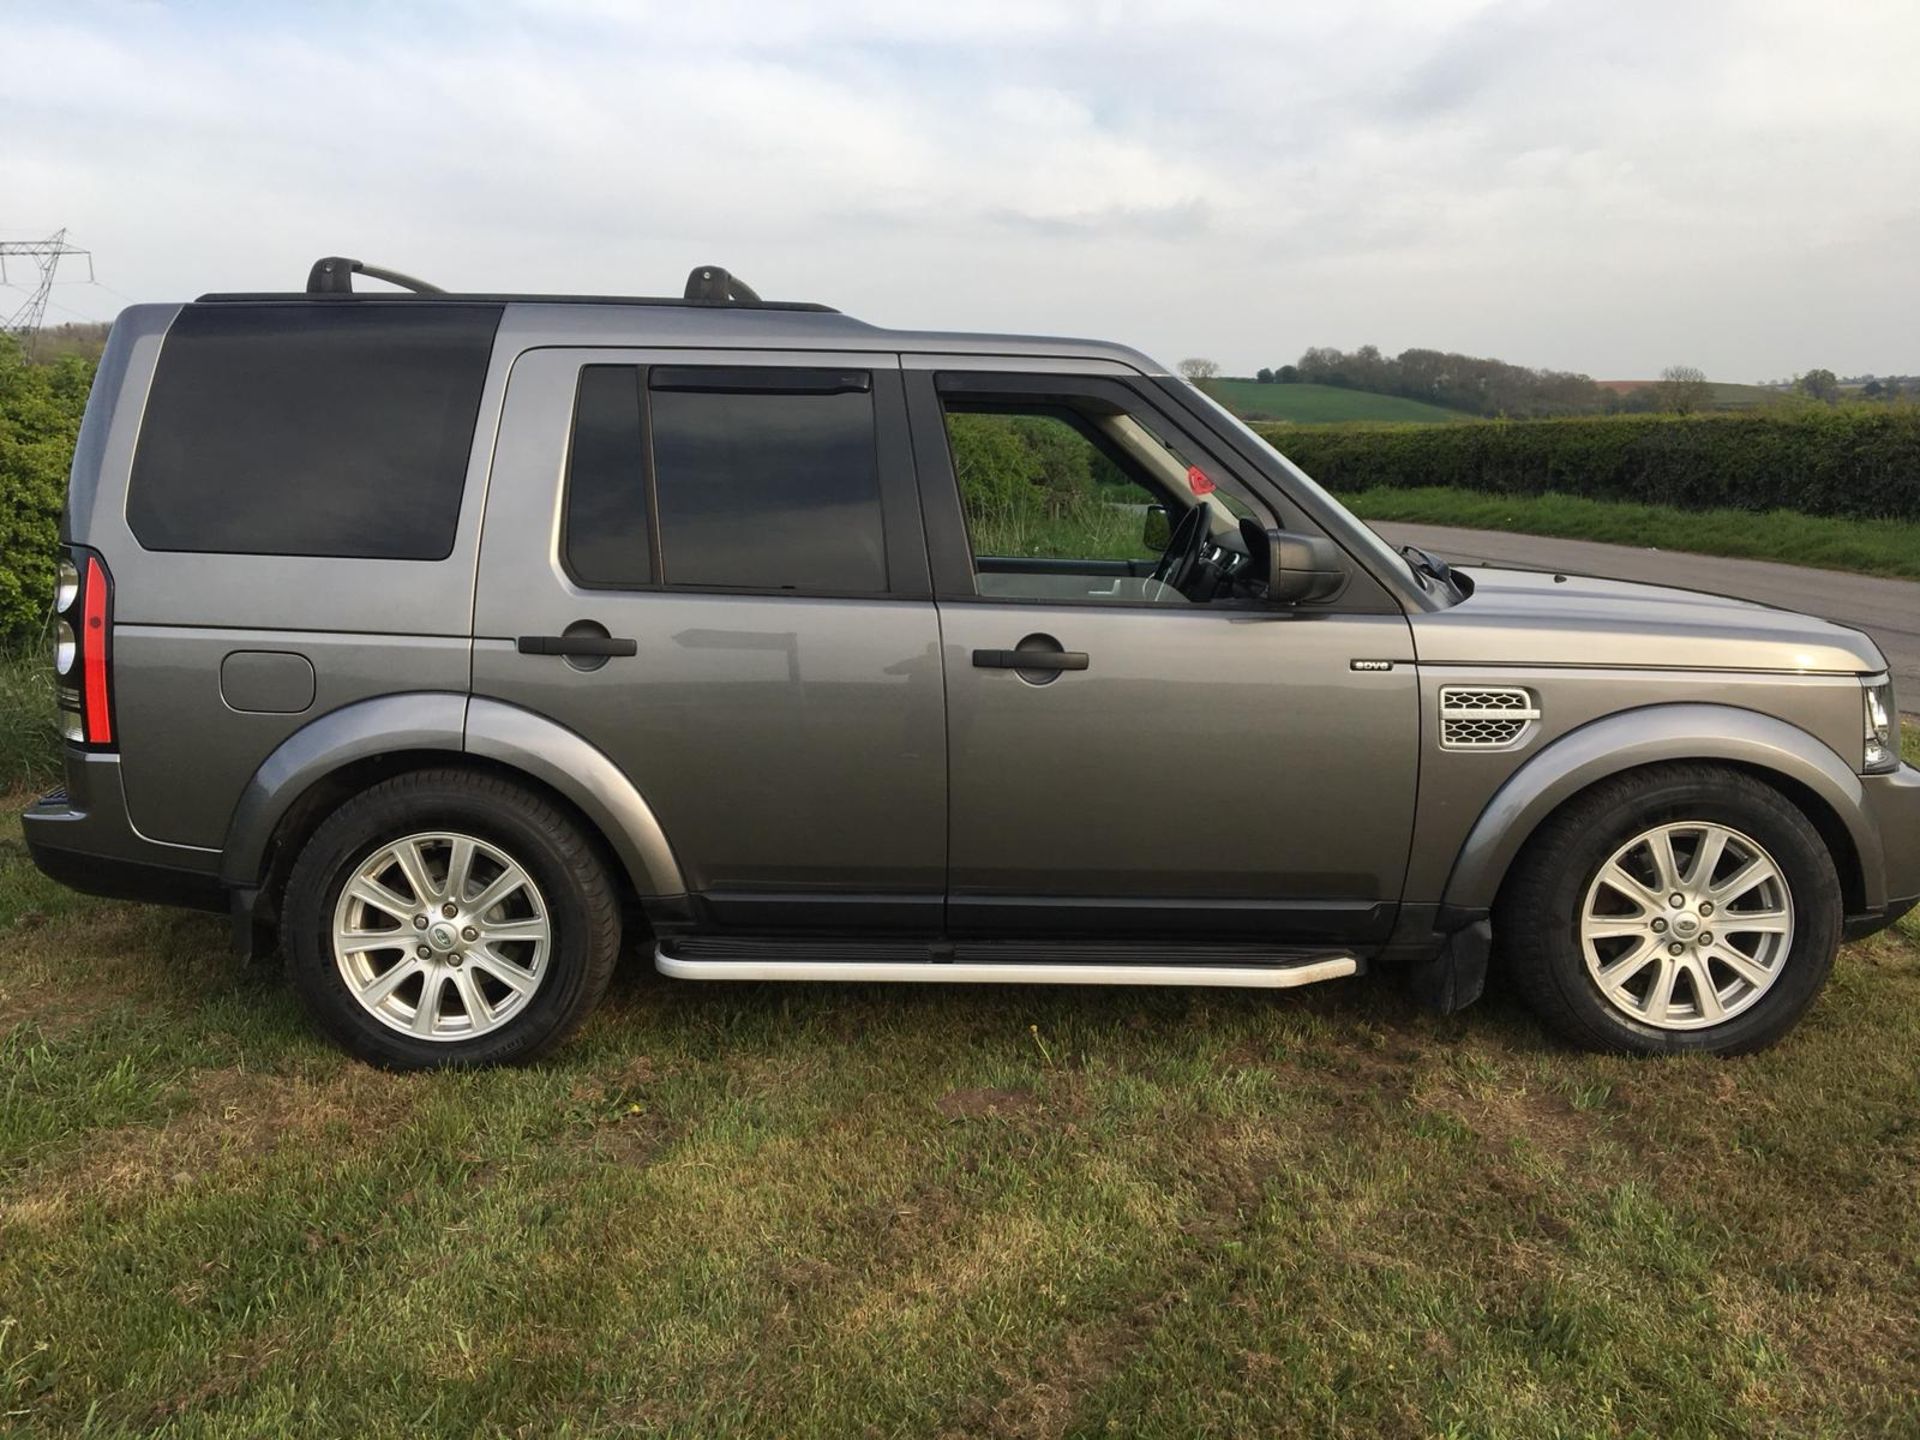 2007/07 REG LAND ROVER DISCOVERY 3 TDV6 SE AUTOMATIC 2.7 DIESEL 4X4, 7 SEATS, FACE-LIFT *NO VAT* - Image 9 of 16